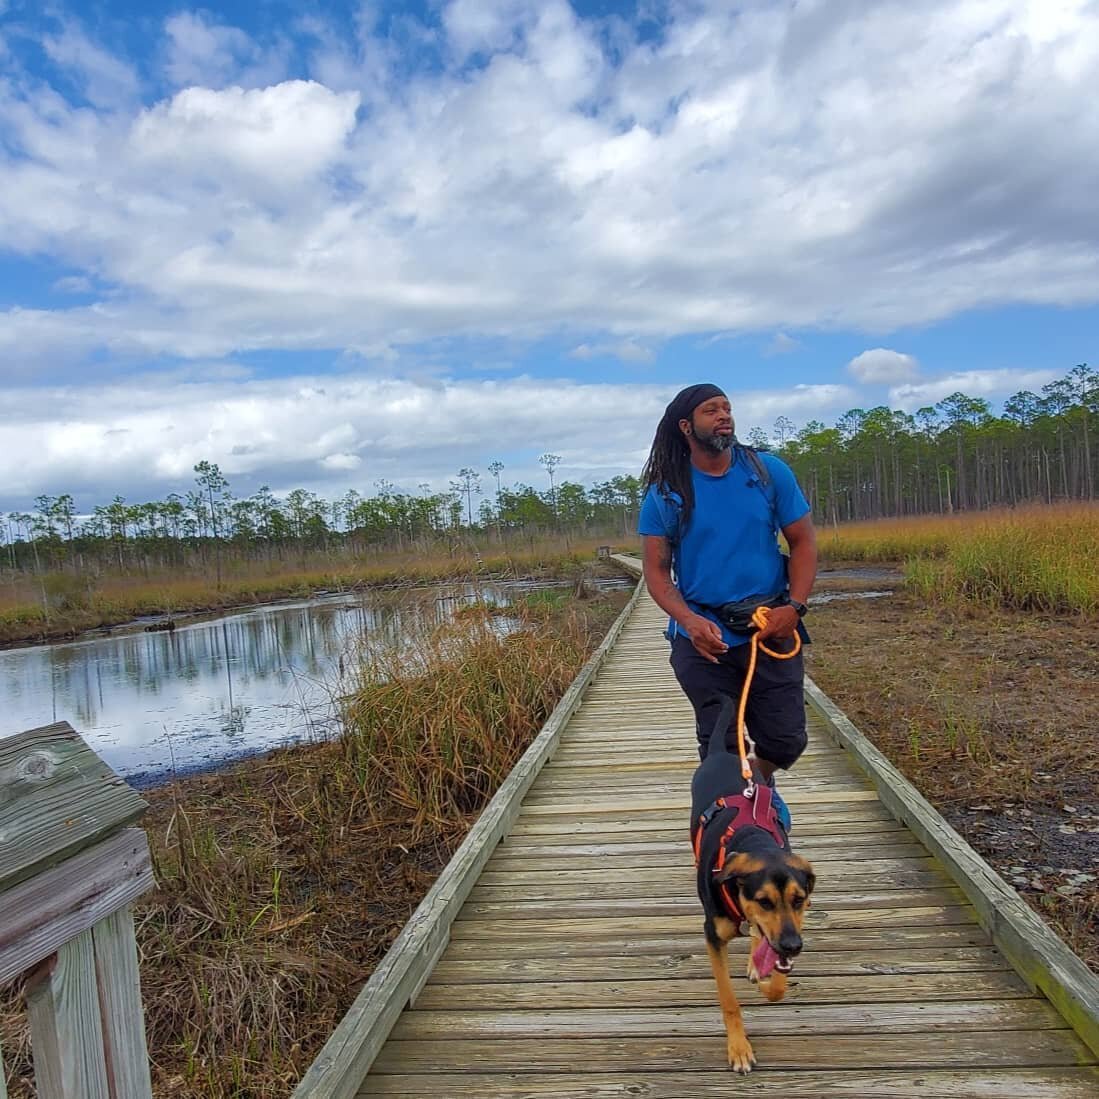 Today took Django out for his first outing on my local trail. He had an absolute blast taking in all the sights and smells but I'm afraid I just ruined him. Come time to leave I had to wrestle with him and lift his 50lb butt up to get him in the car.